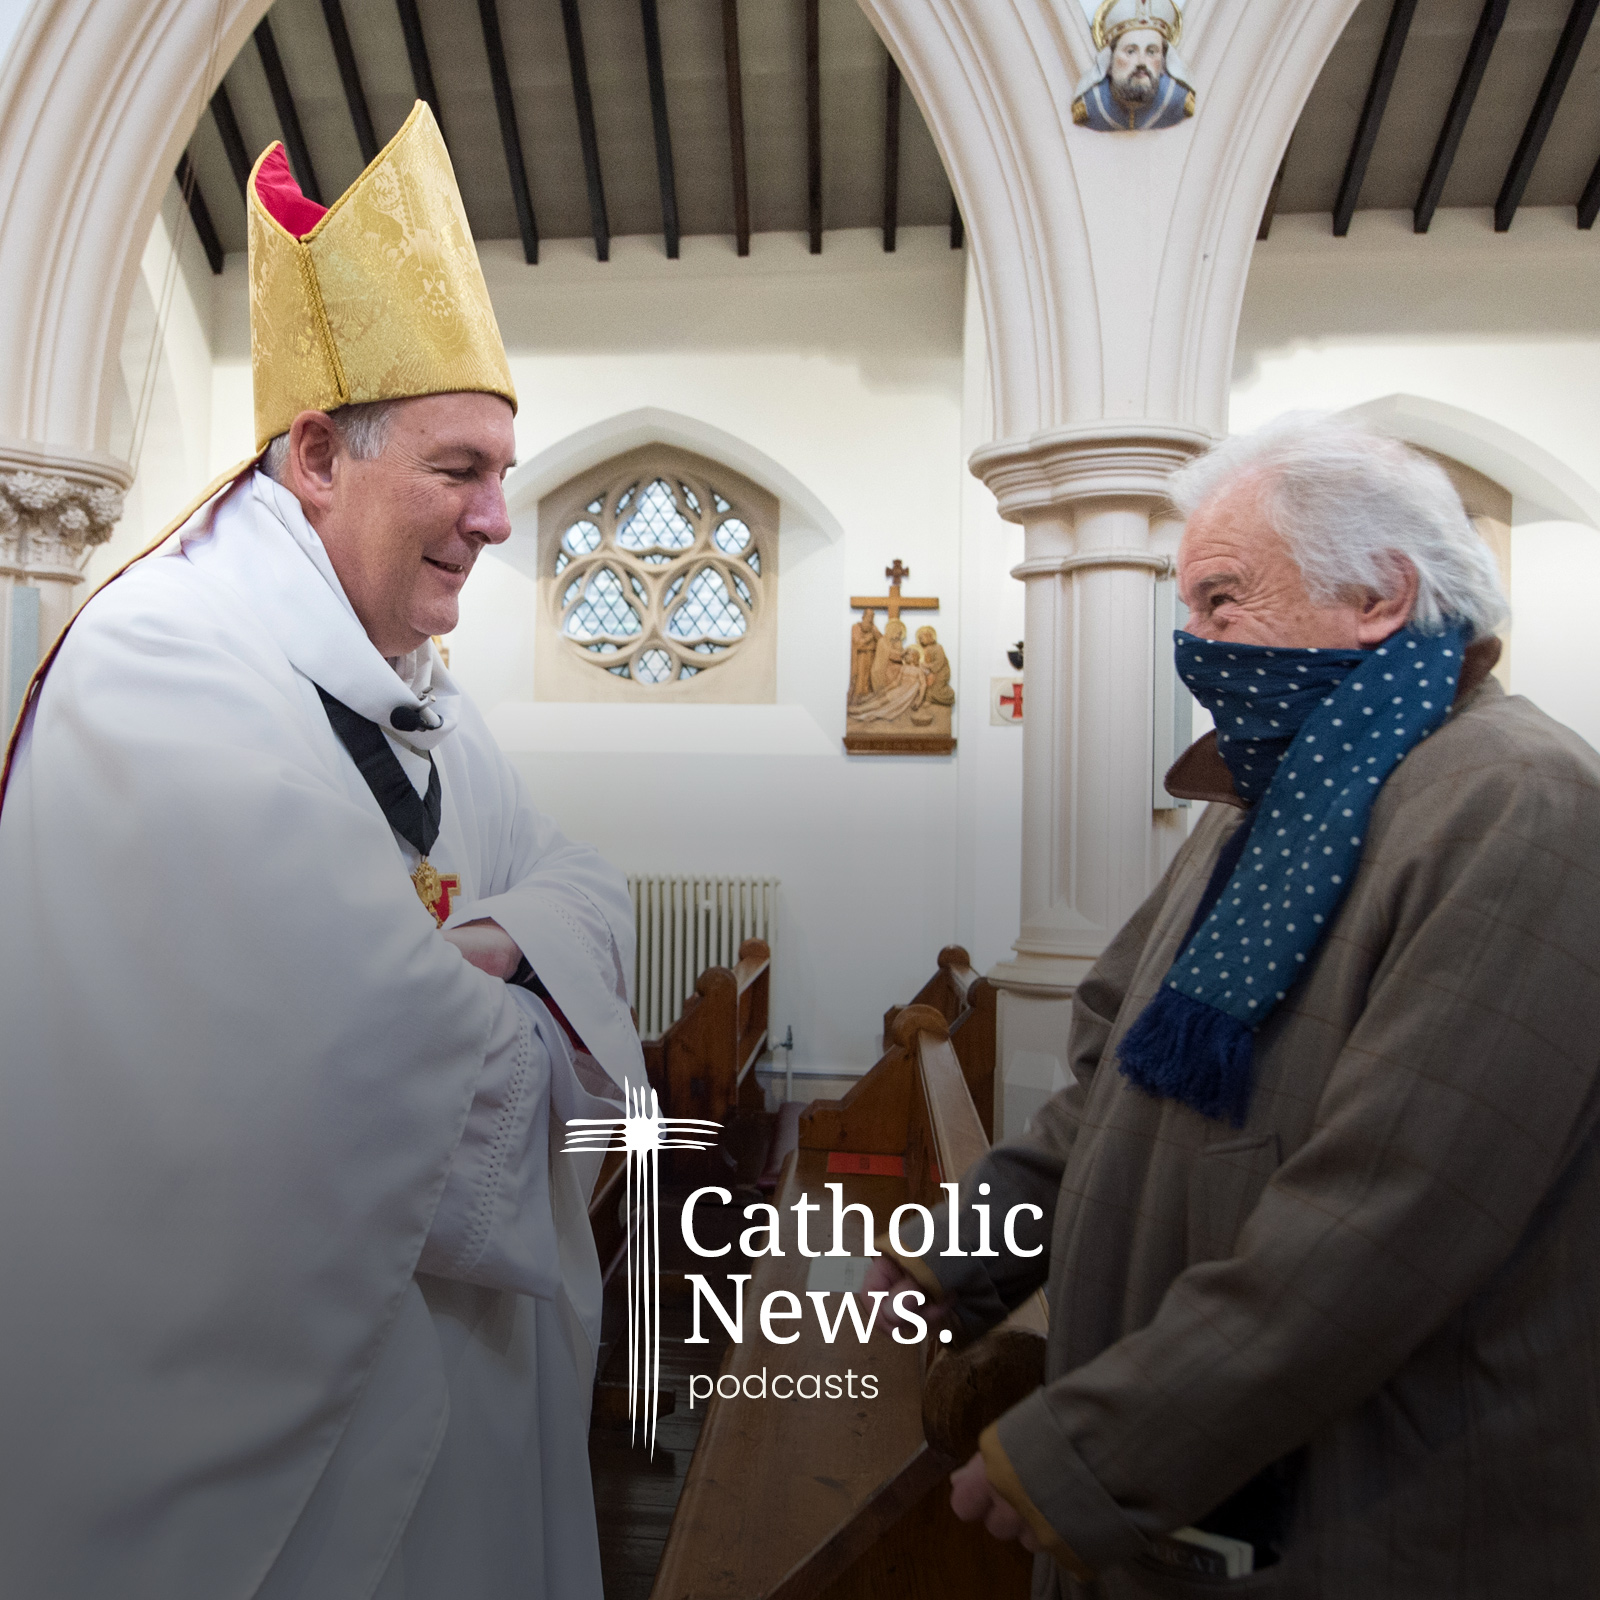 Bishop thanks the elderly for their fidelity to the Catholic Church